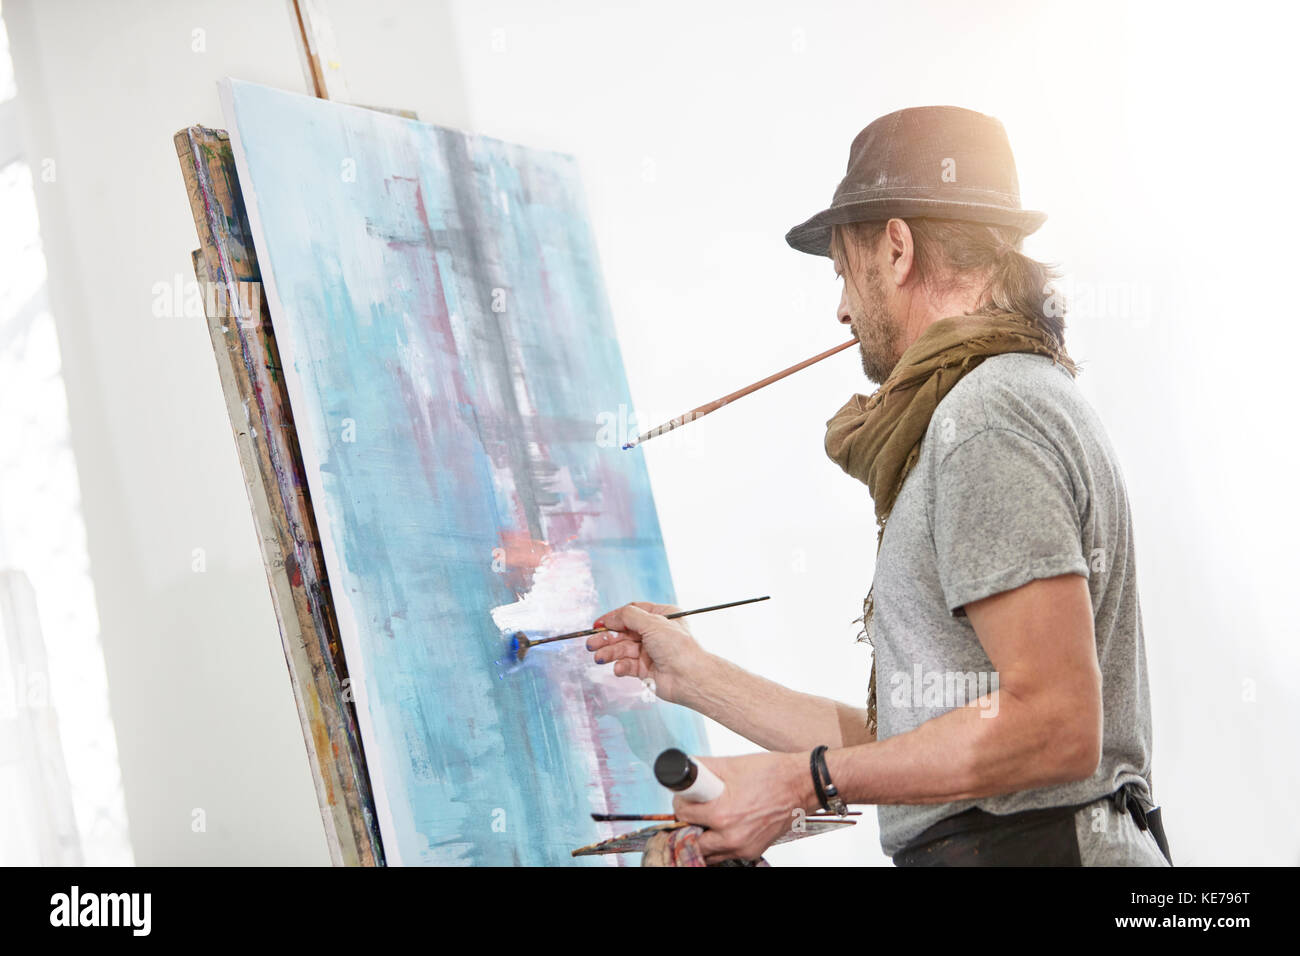 Male artist painting at easel in art studio Stock Photo